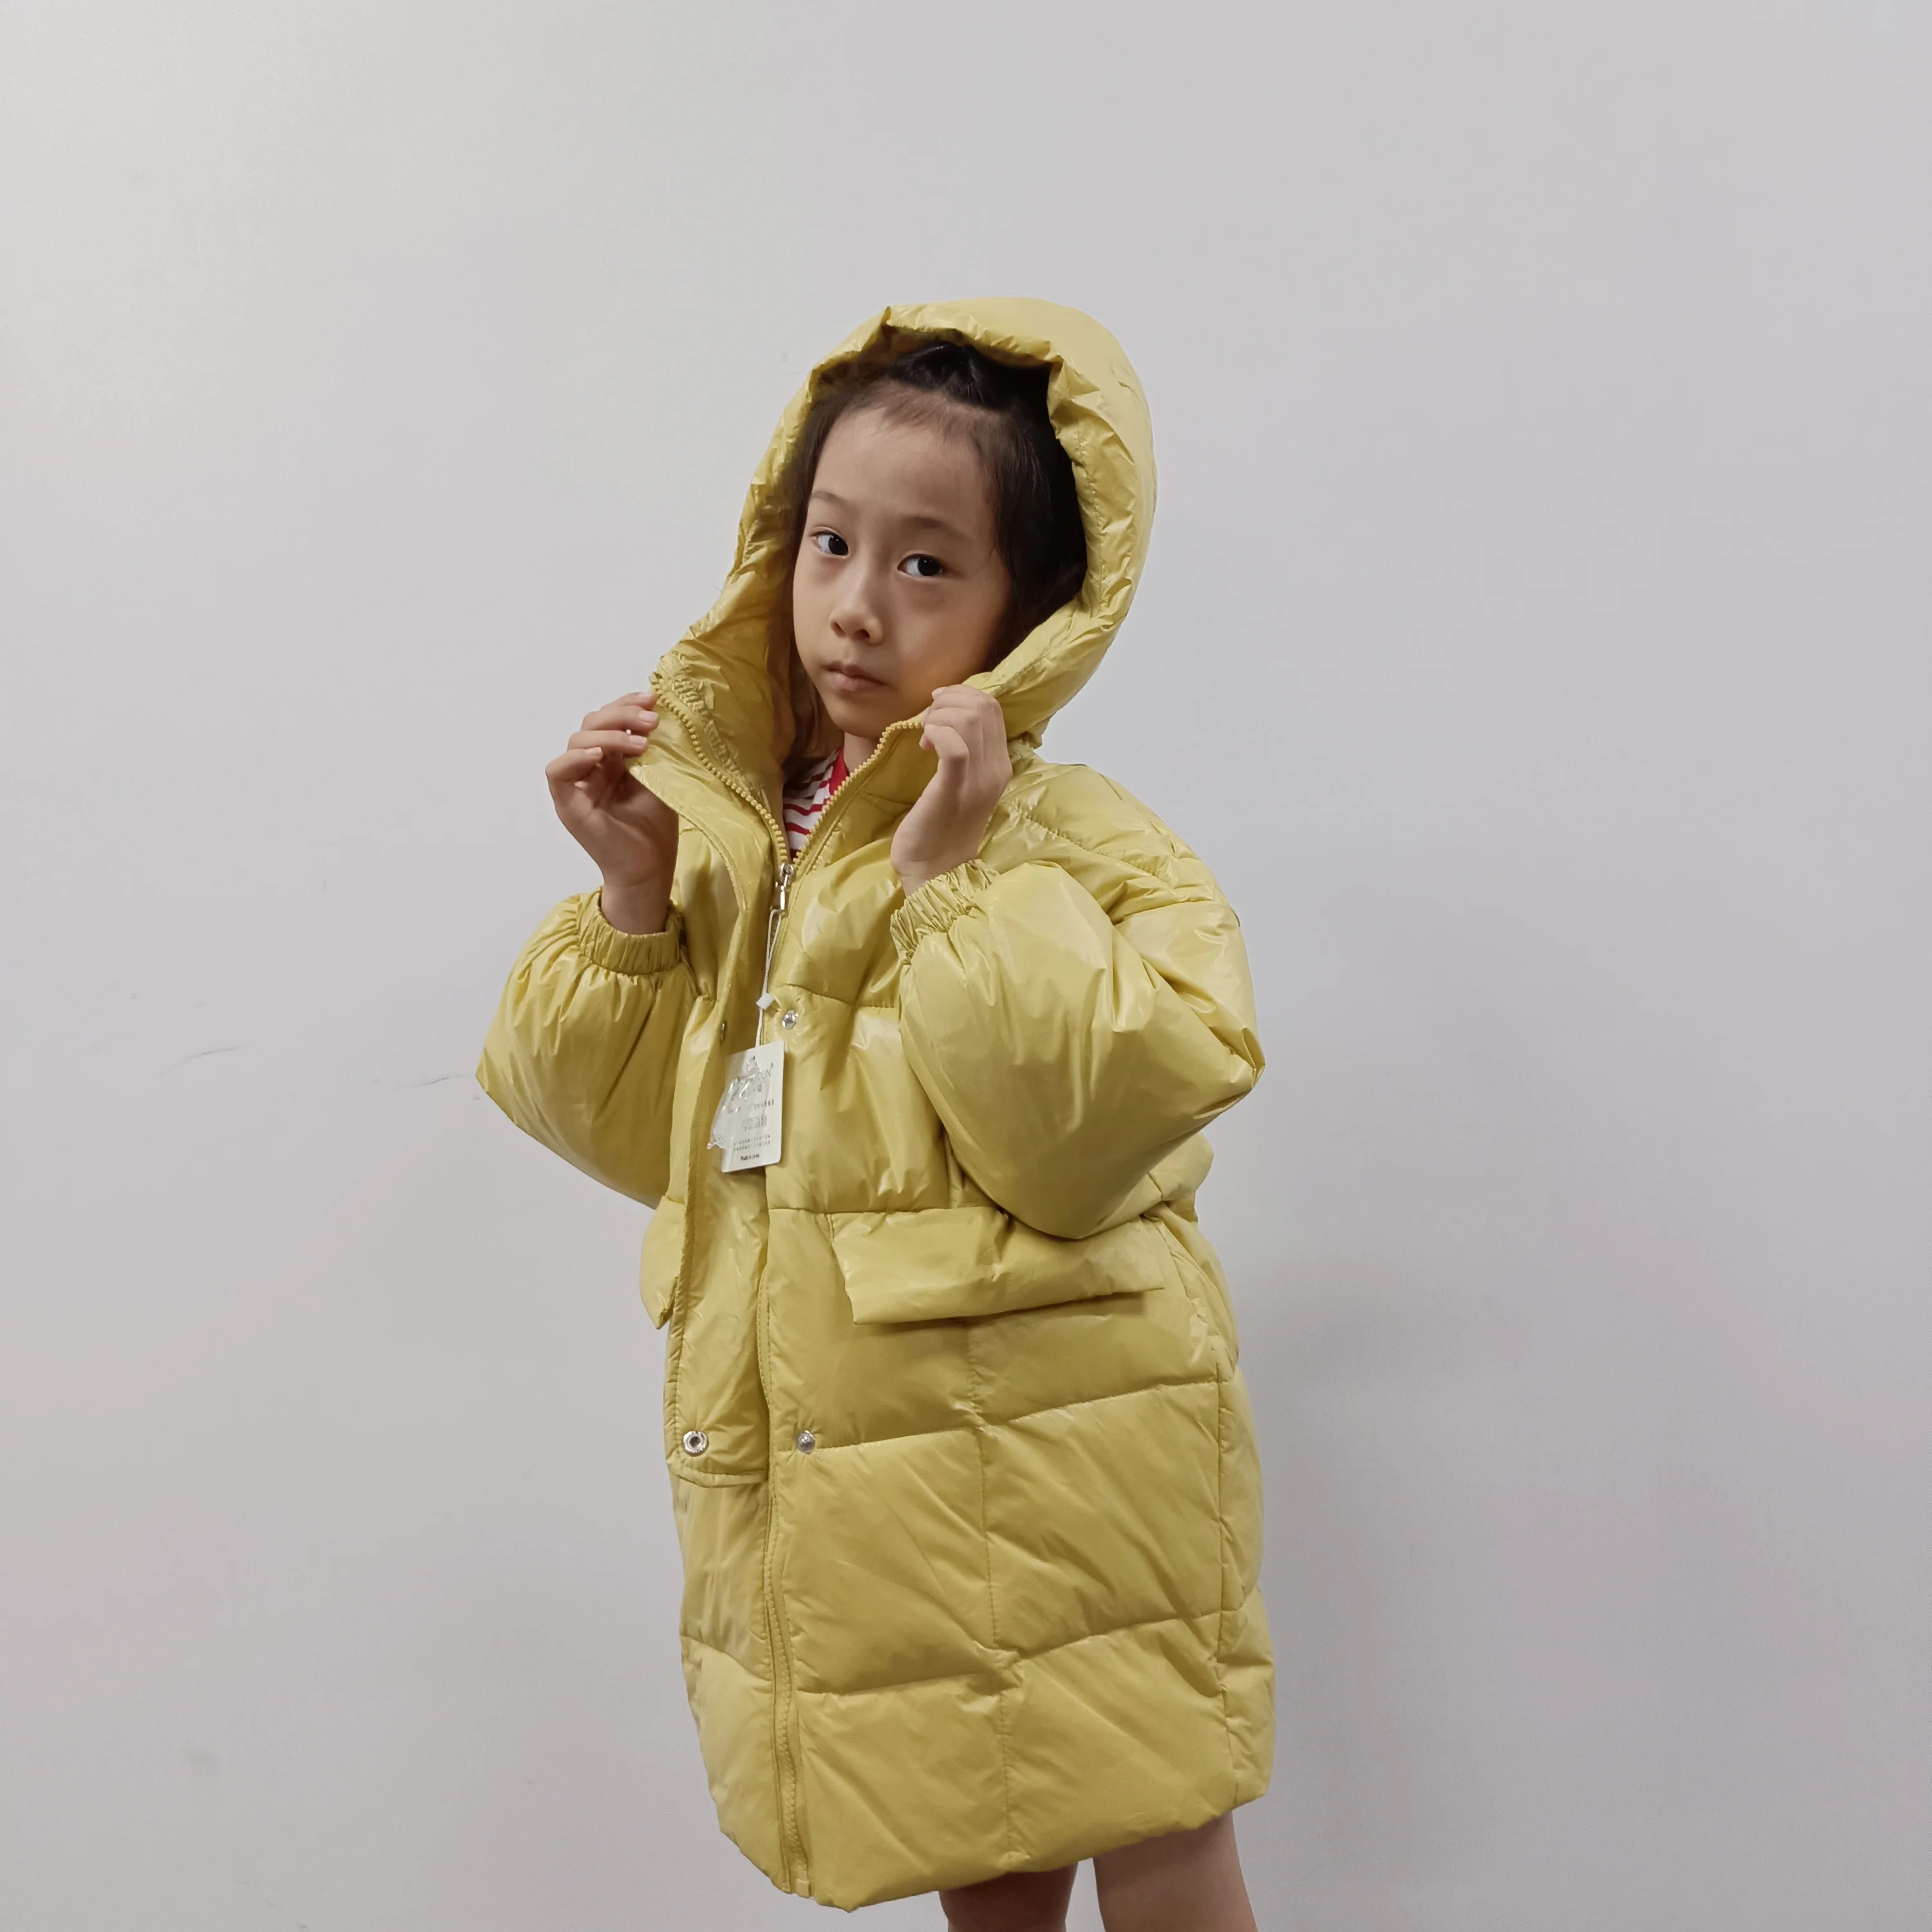 

New Arrival Cheap Price Winter Fashionable Warmth Thick Kids Girls Puffer Down Jacket Coat With Hood, 4 colors